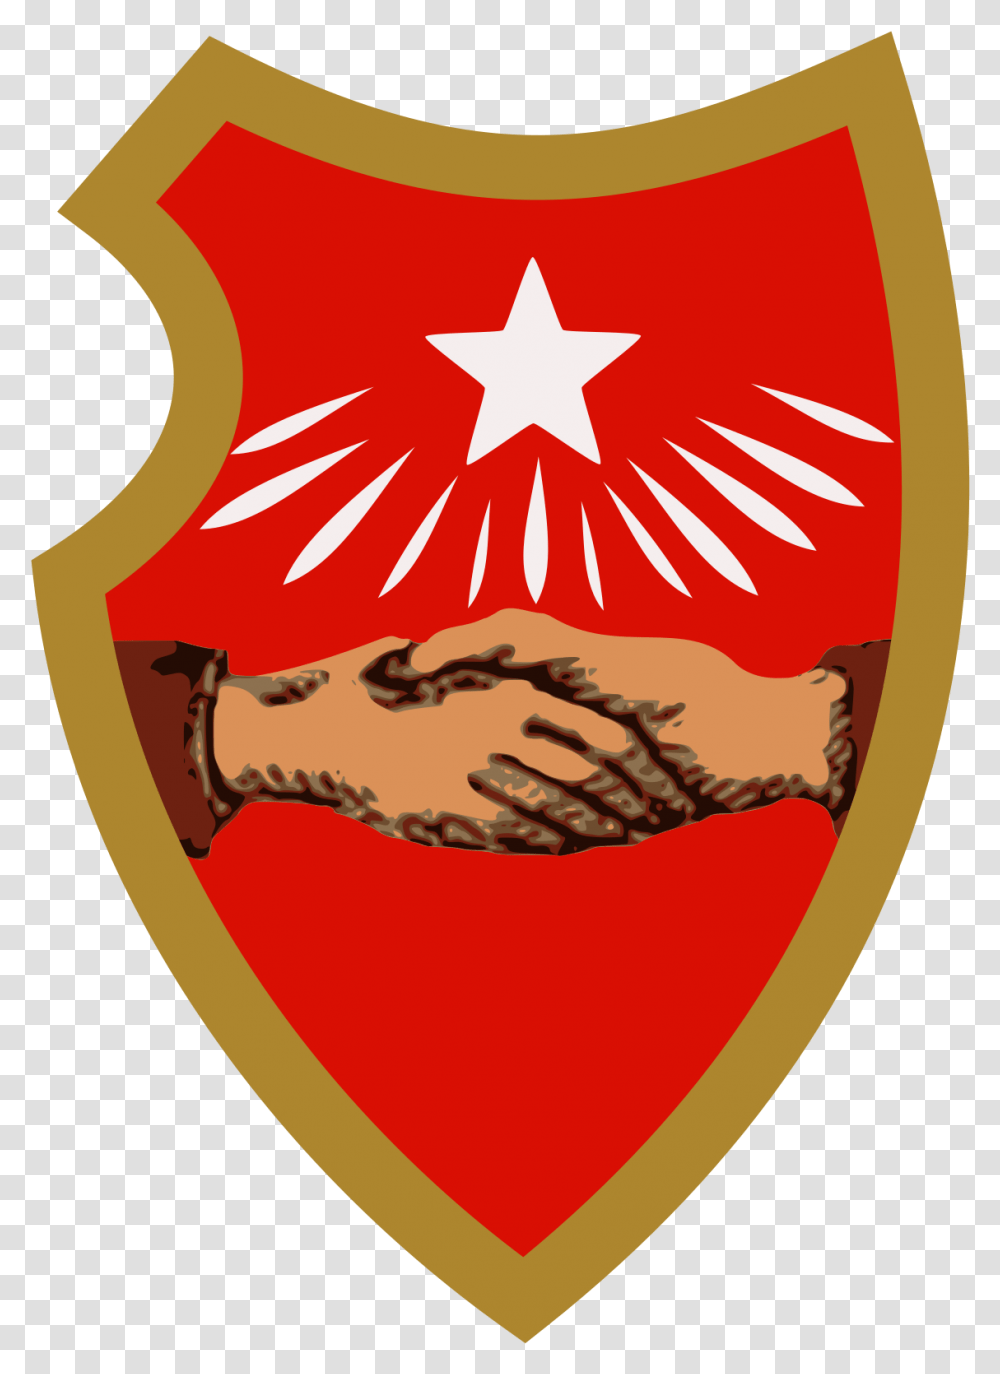 Social Democratic Party Of Germany Symbol, Armor, Shield, Hand, Logo Transparent Png